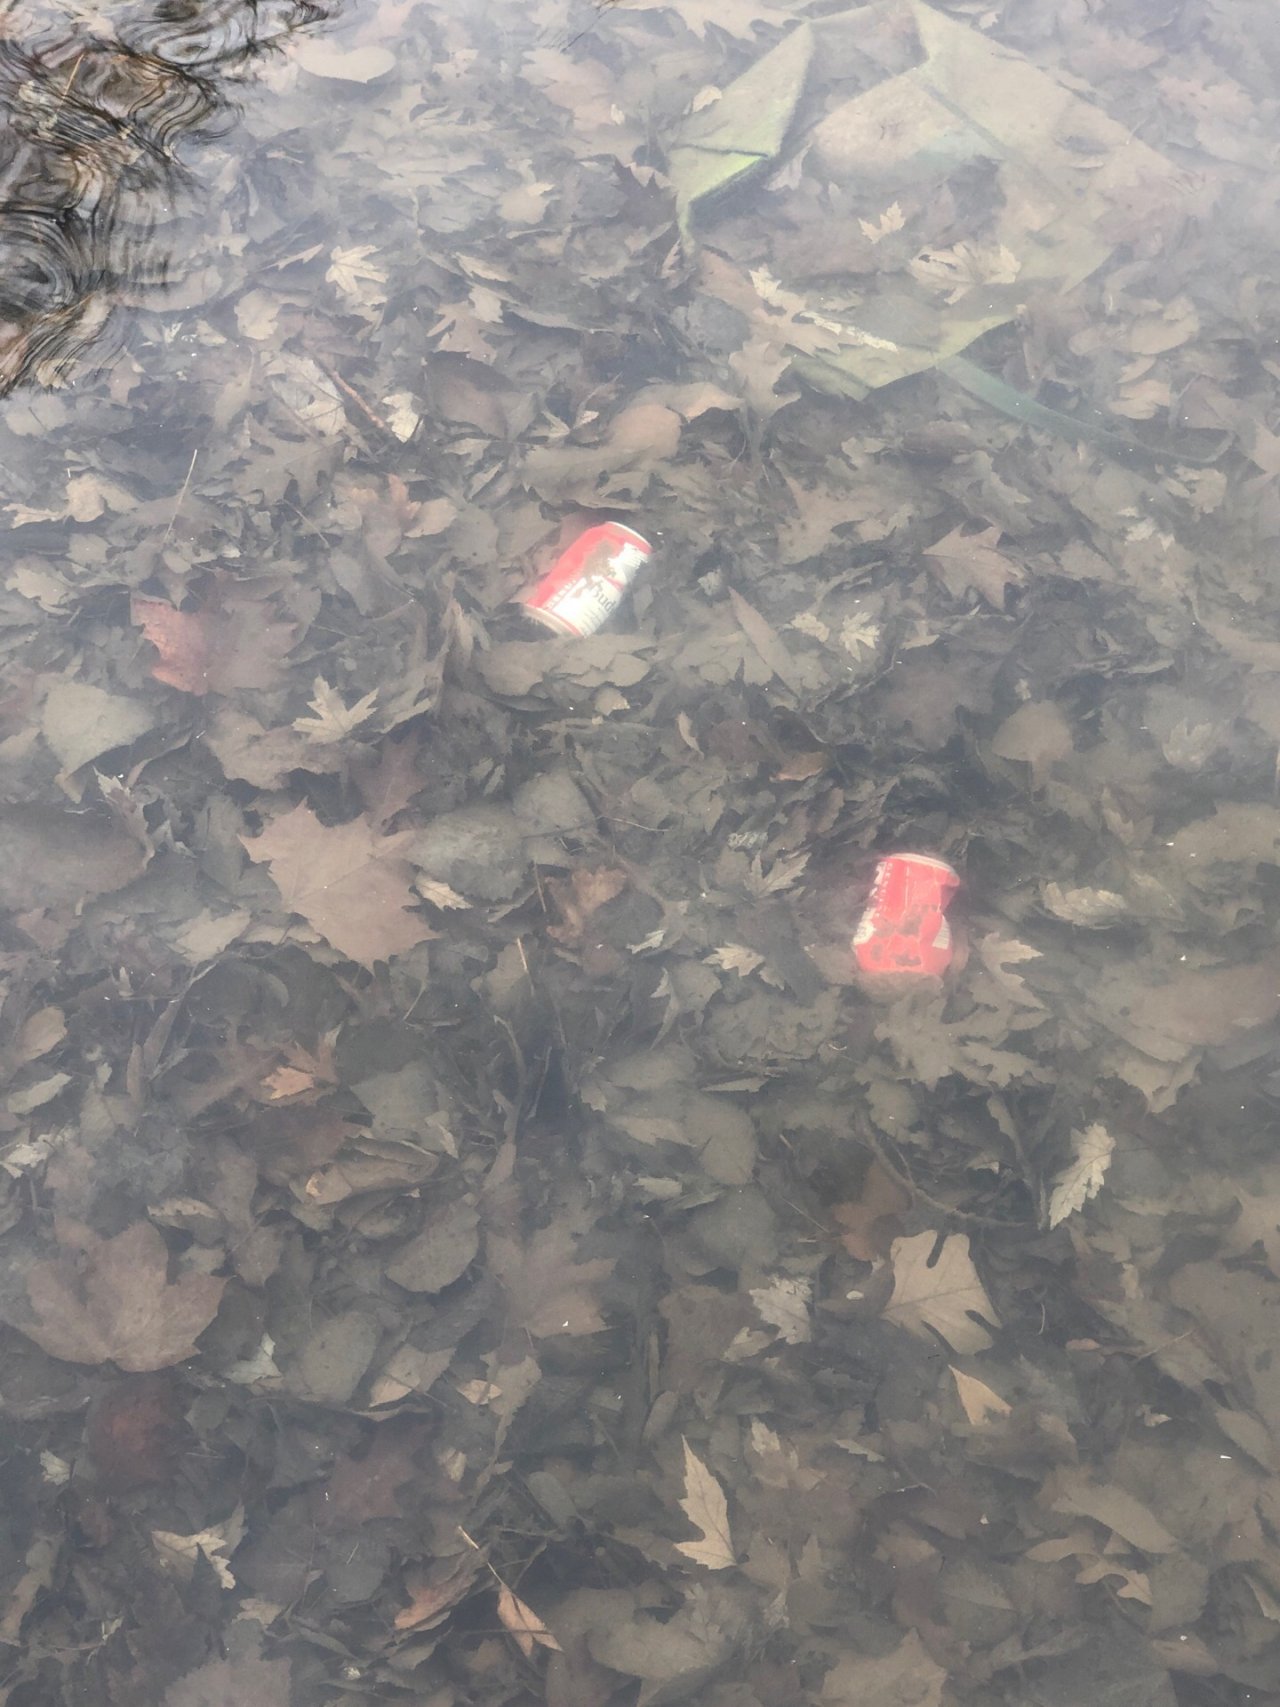 plastic pollution in CrowdWater App spotted by Clayton Jost on 18.12.2020